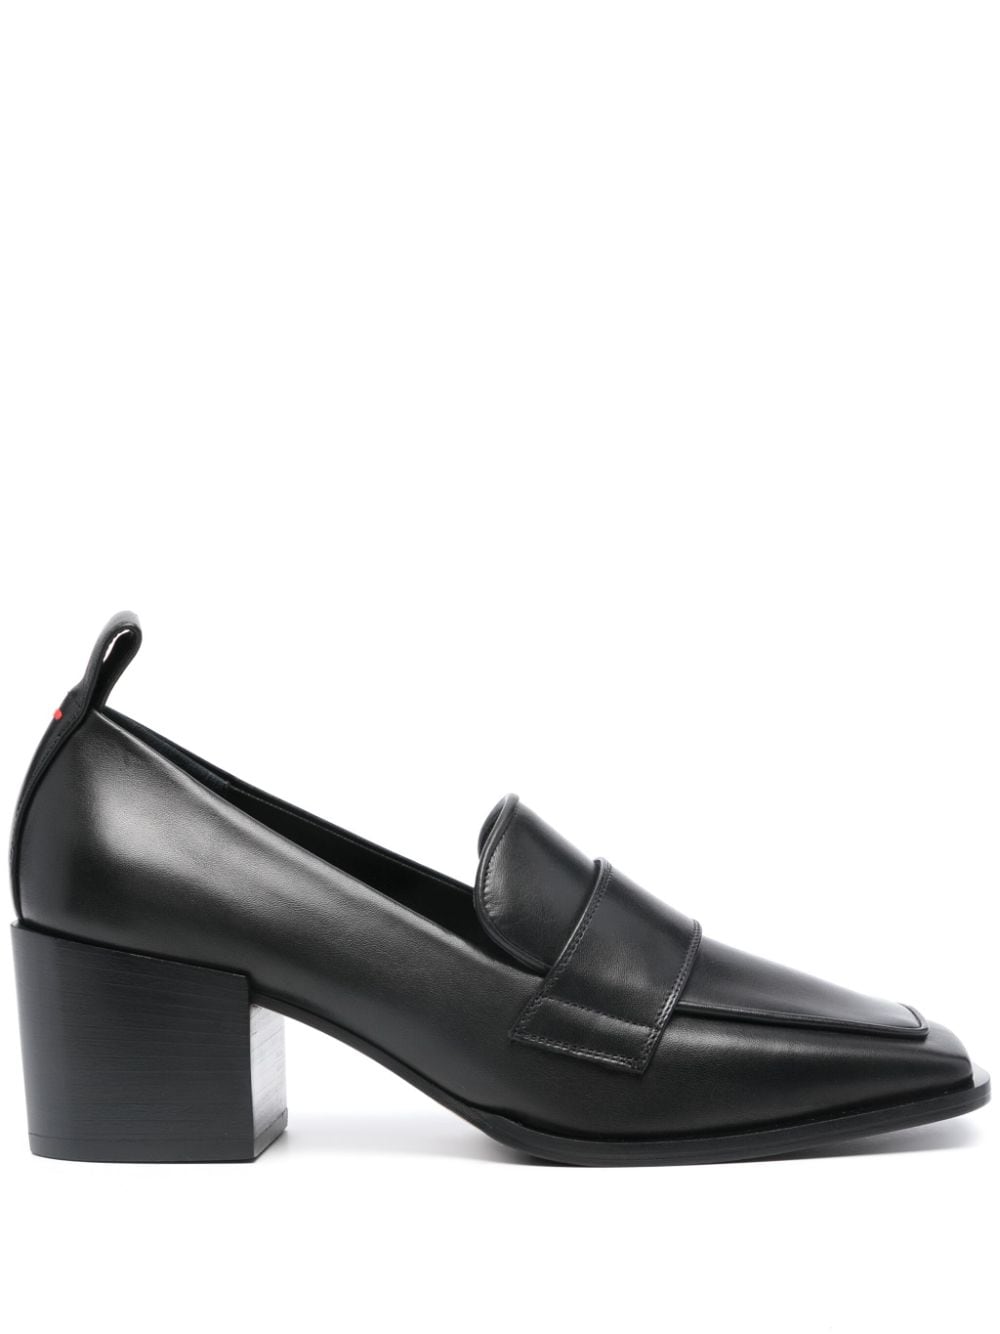 Aeyde Anka 55mm leather loafers - Black von Aeyde